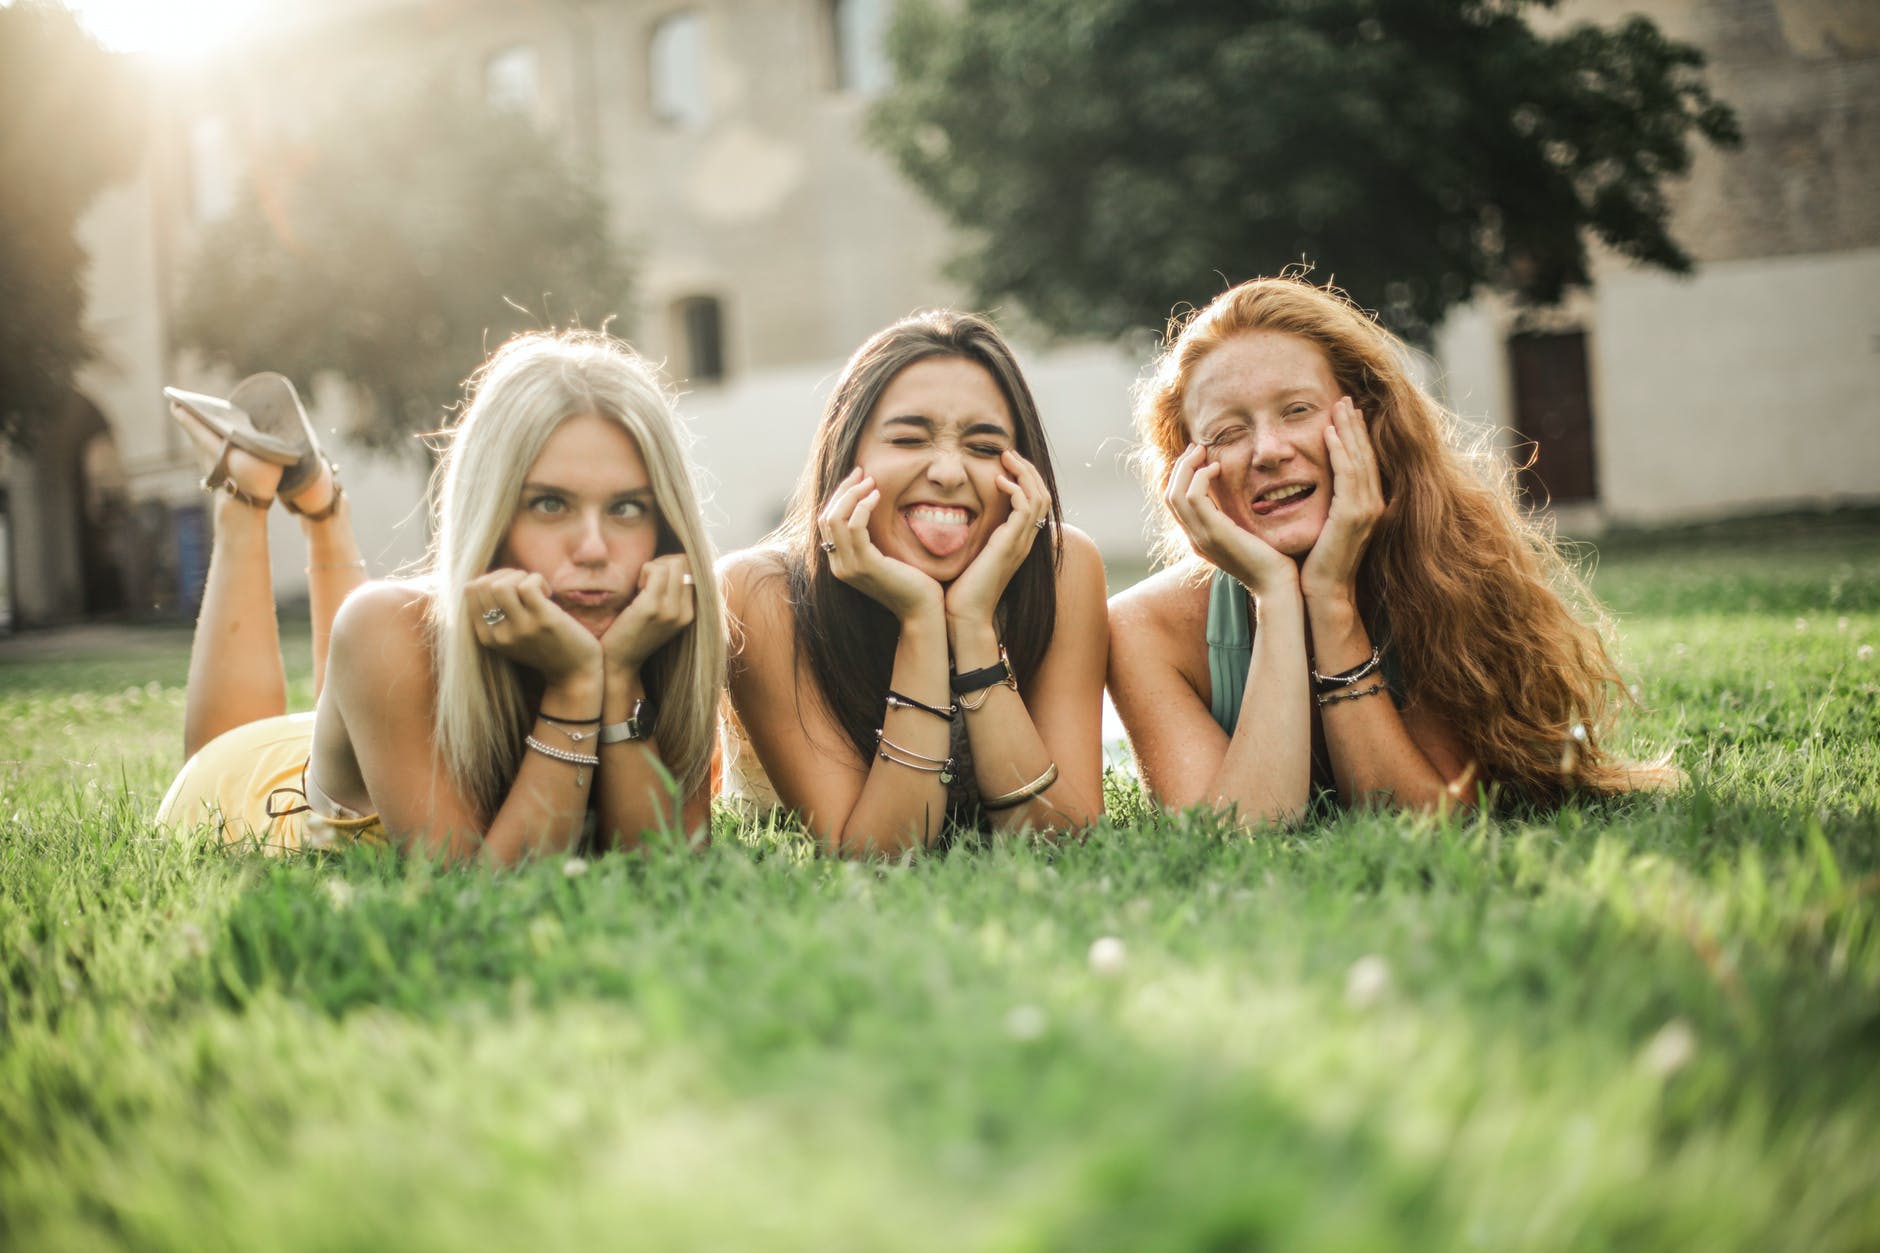 4 Zodiac Signs That Are Great for Making Friends